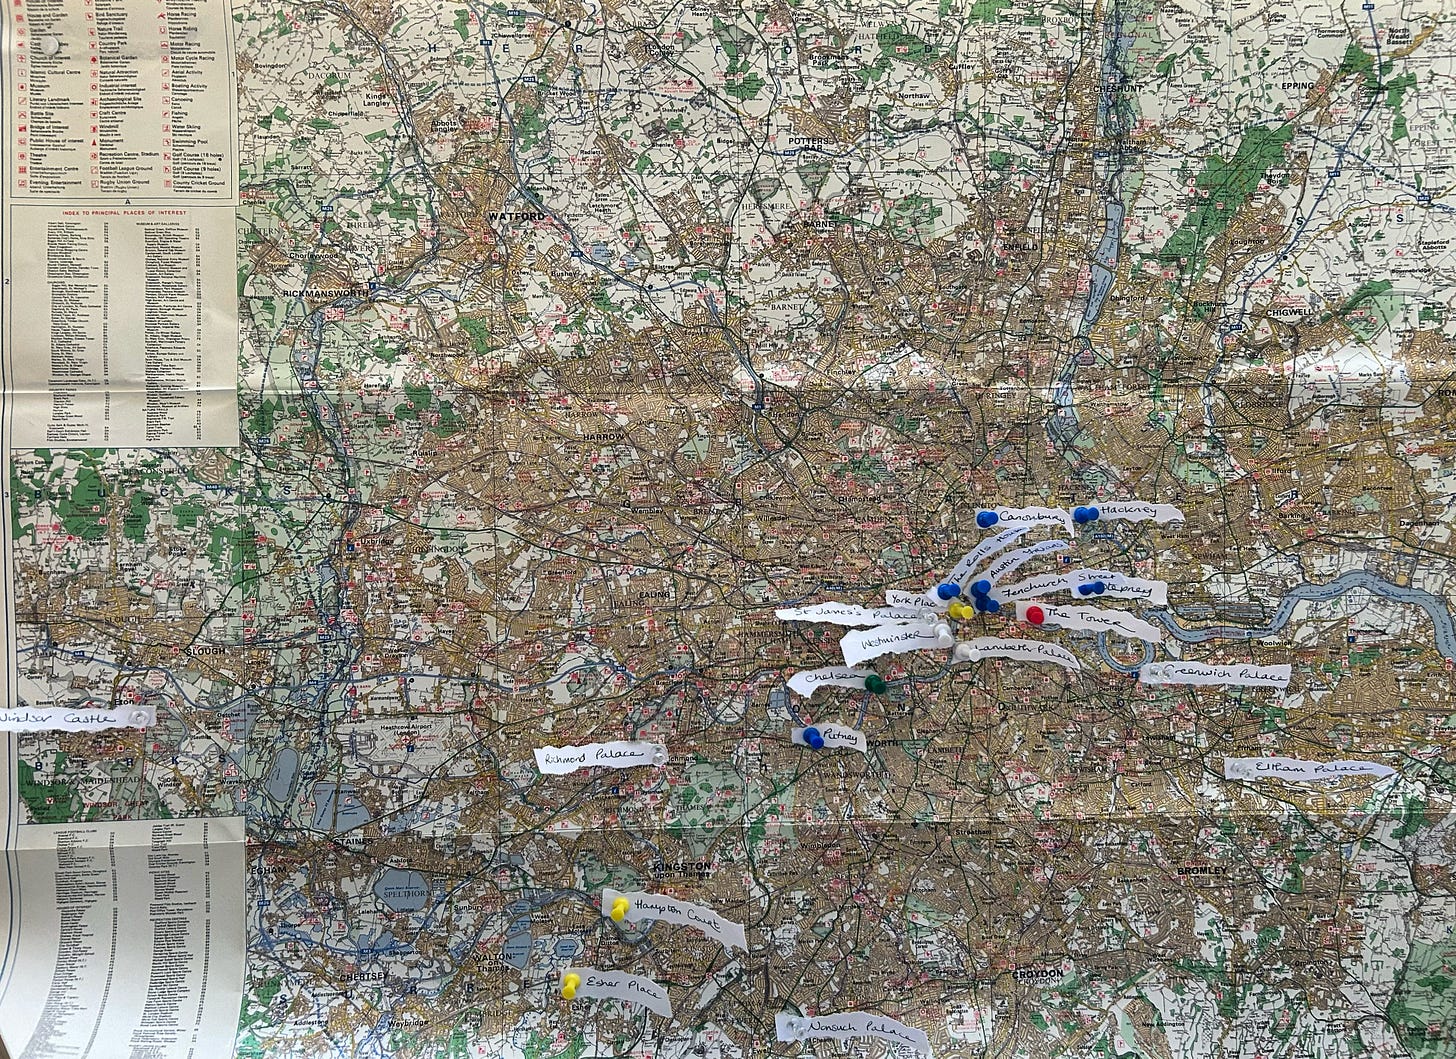 A map of Greater London, with pins and small strips of paper to mark locations